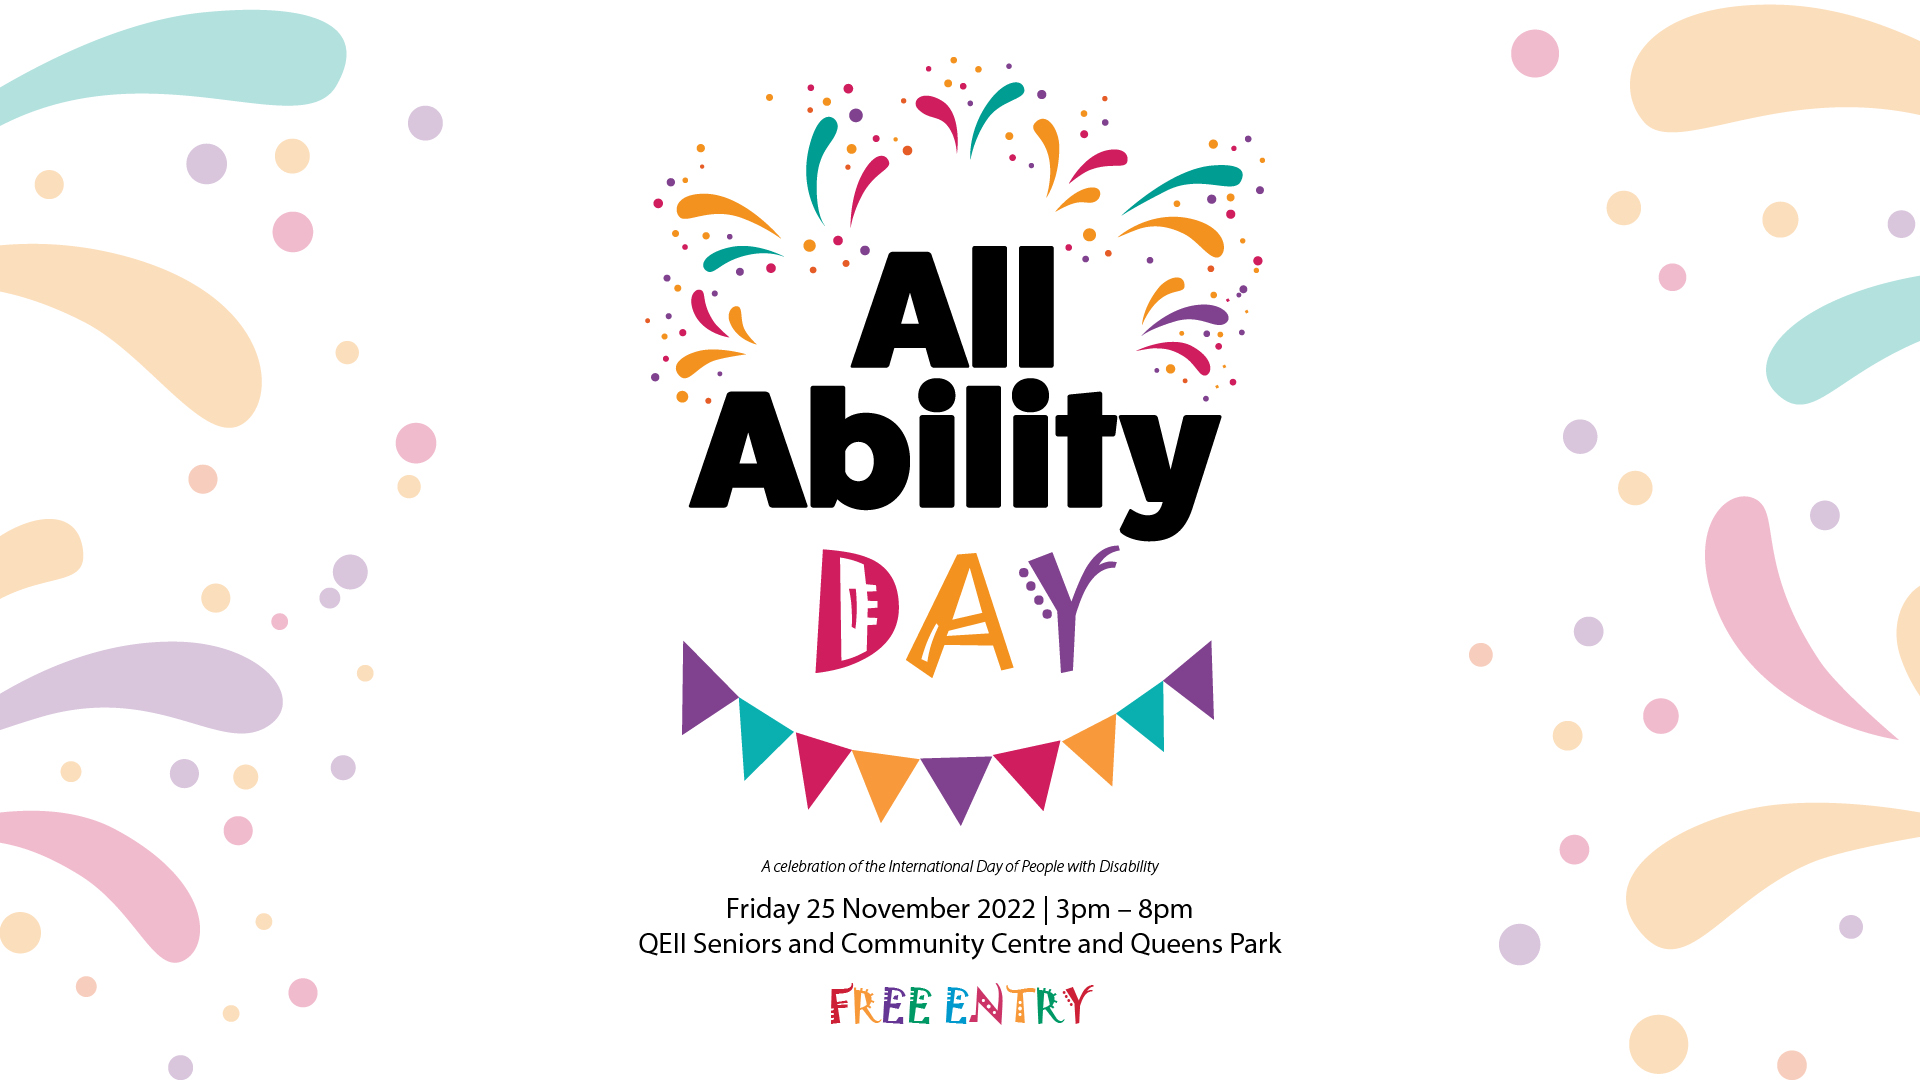 All Ability Day